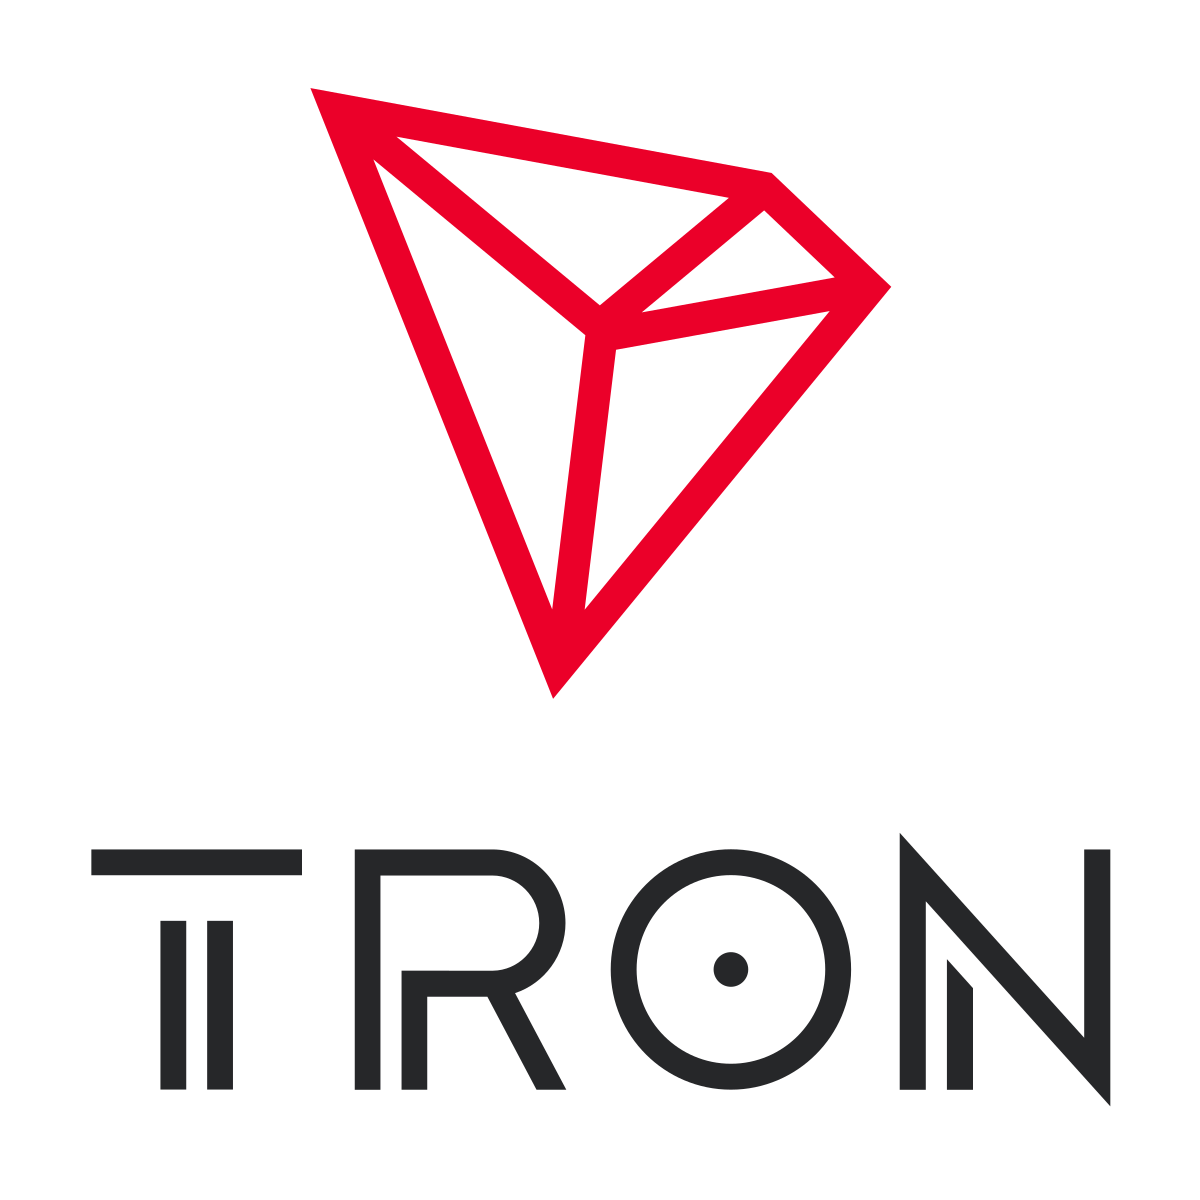 Tron Price Prediction | Is TRX a Good Investment?